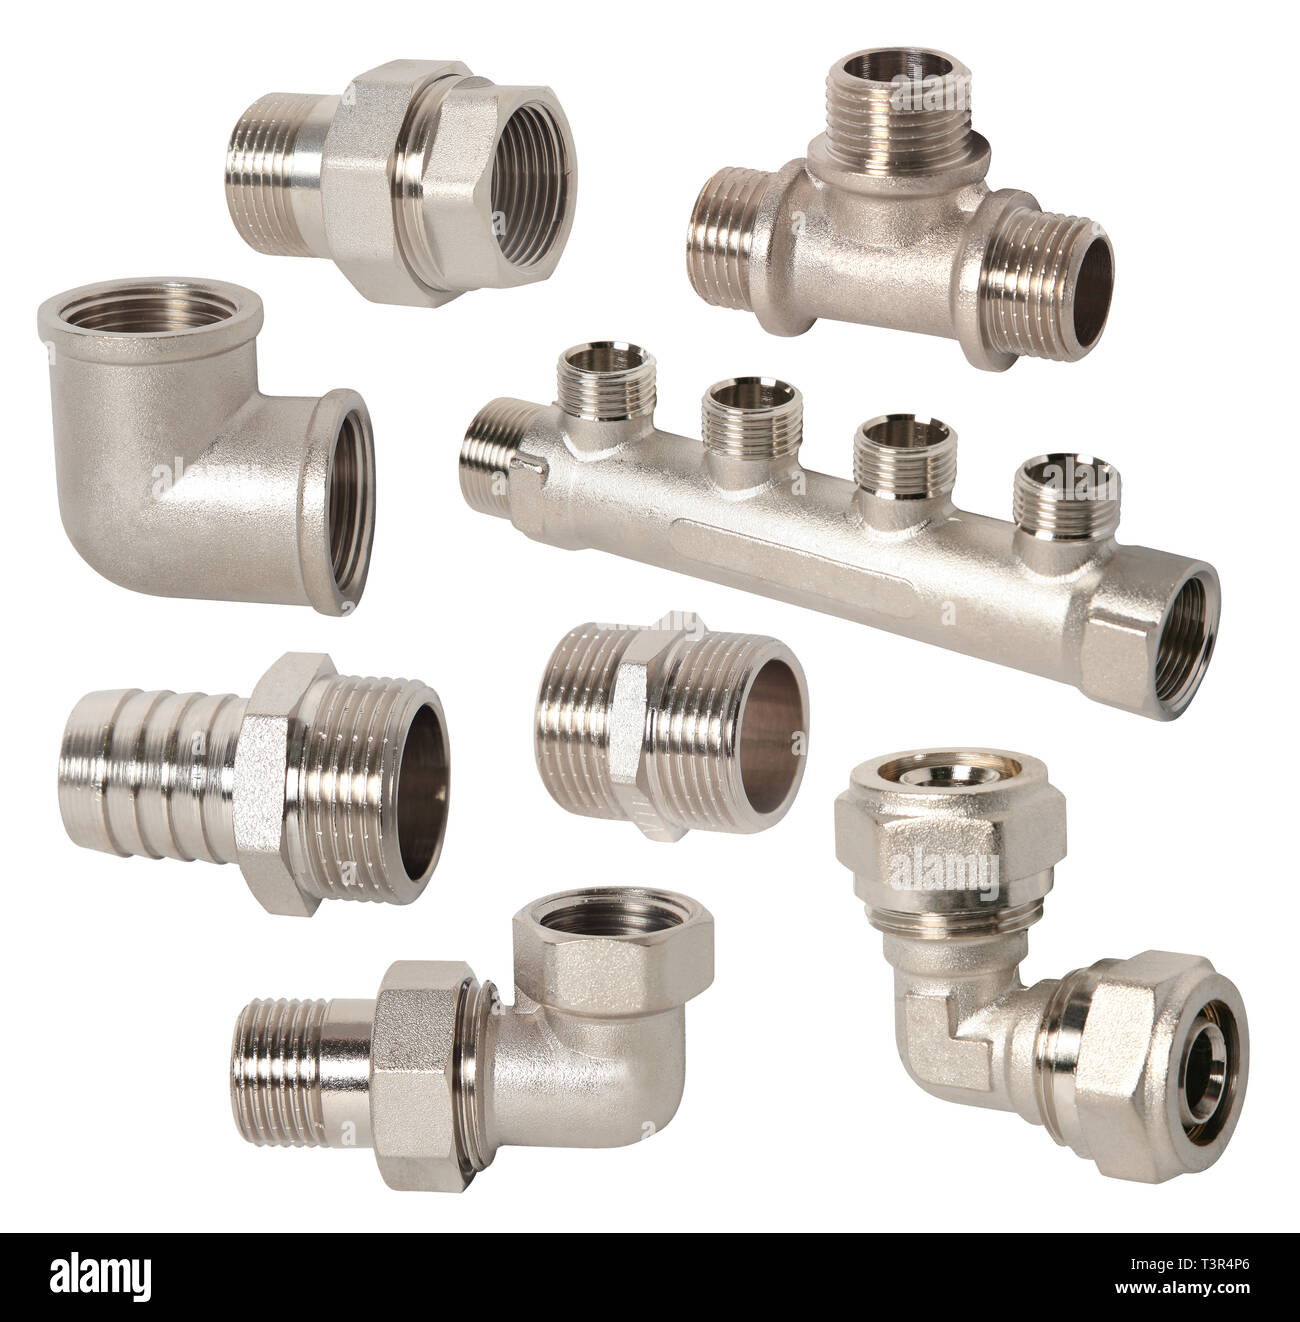 Pipe Fittings High Resolution Stock Photography and Images - Alamy